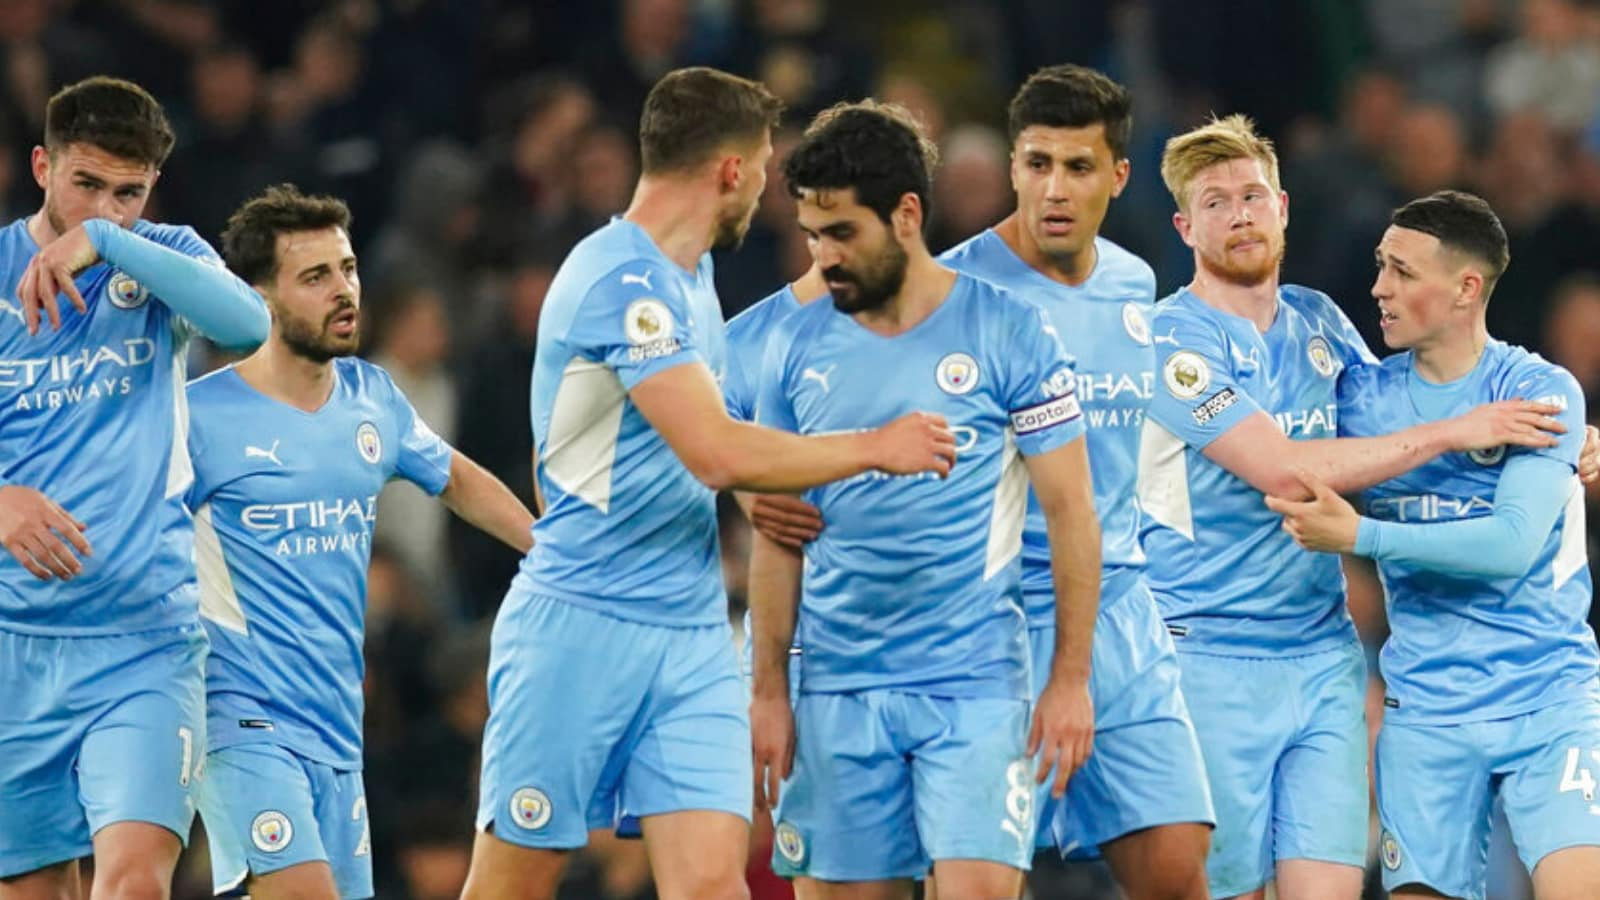 Manchester City reclaimed pole position with a 3-0 win over Brighton & Hove Albion